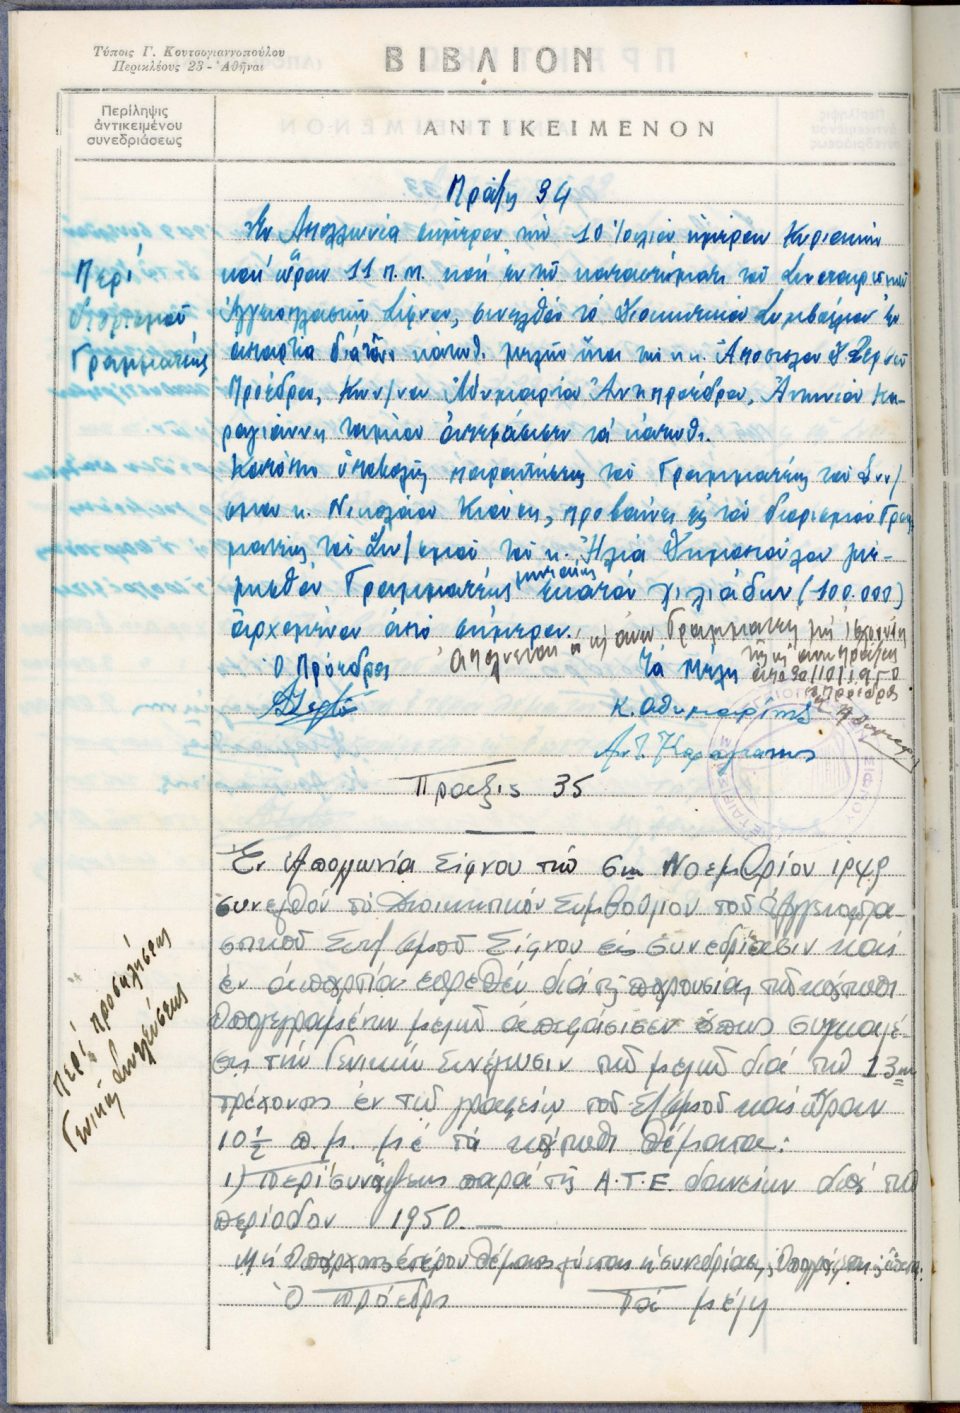 Meeting minutes for Sifnos Potters’ Union, c. 1948. 